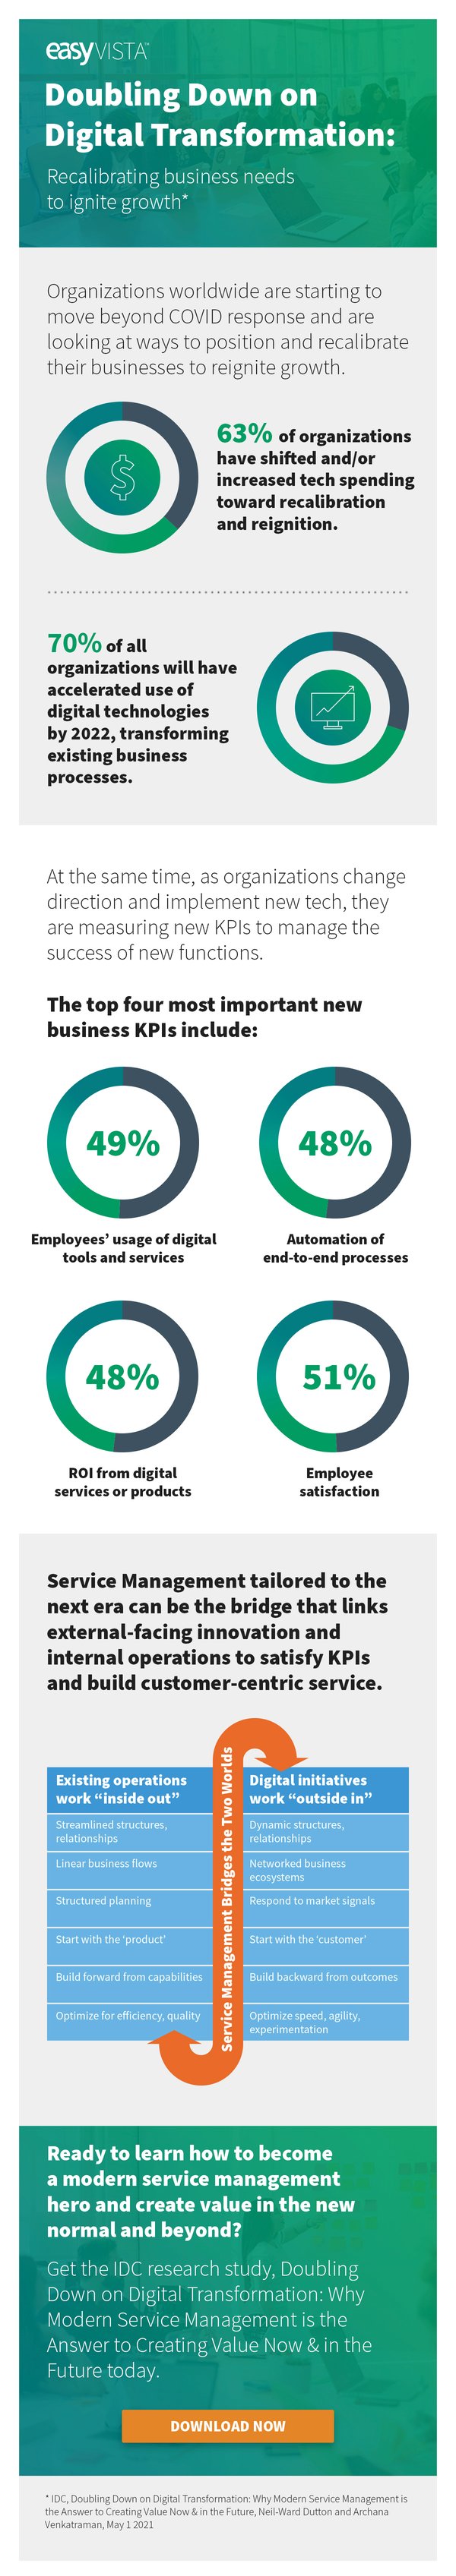 NAM_IDC Research Study EasyVista_Infographic_Doubling Down on Digital Transformation_EN